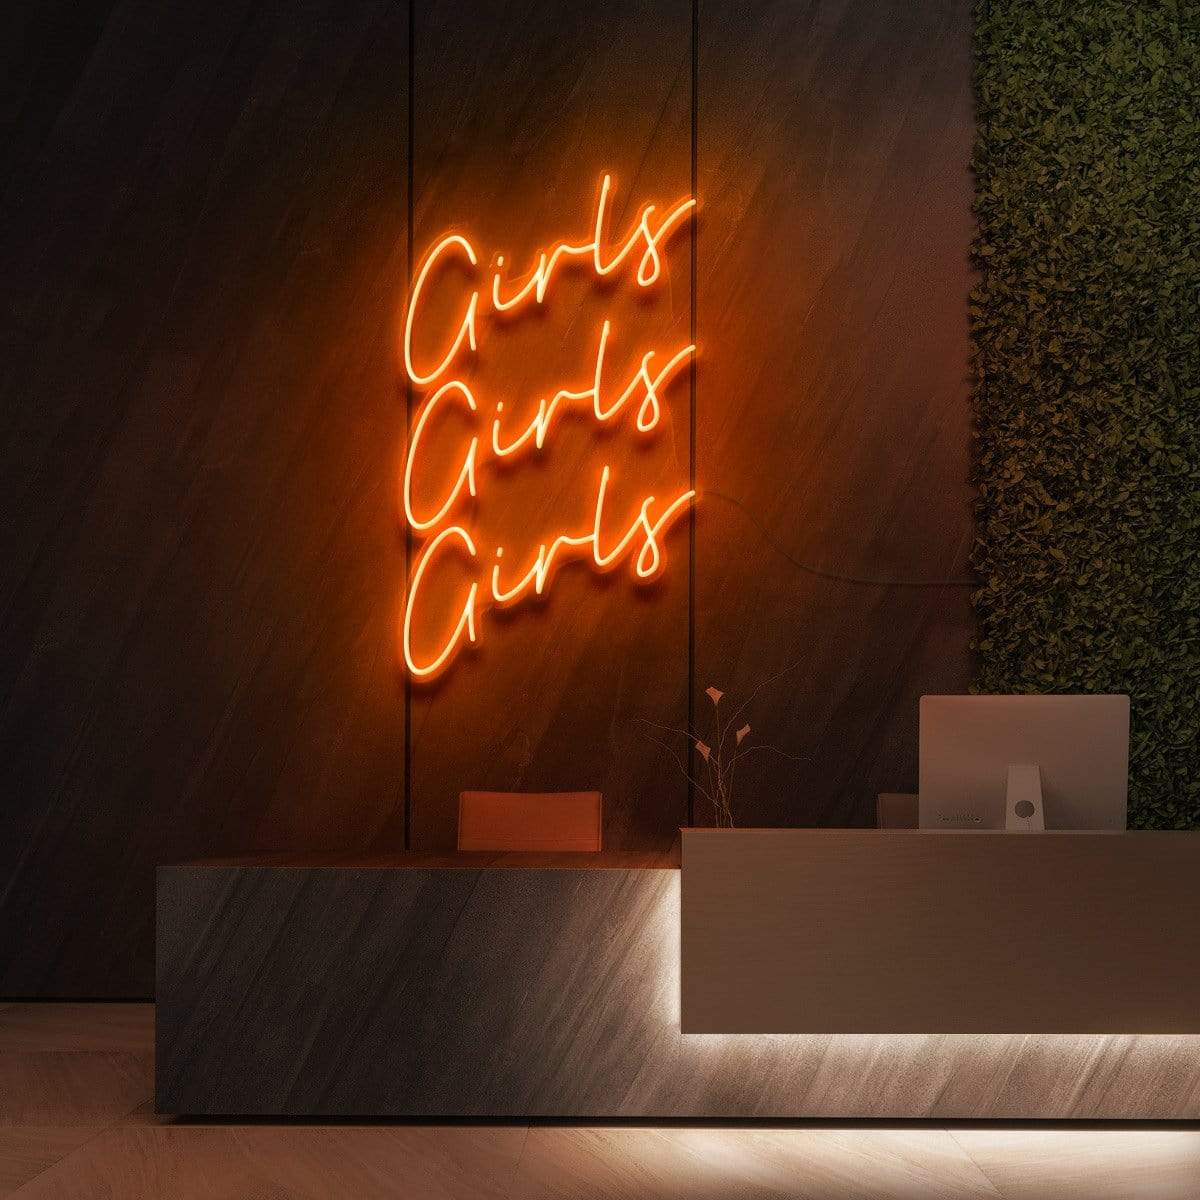 "Girls Girls Girls" Neon Sign for Beauty & Cosmetic Studios 60cm (2ft) / Orange / LED Neon by Neon Icons